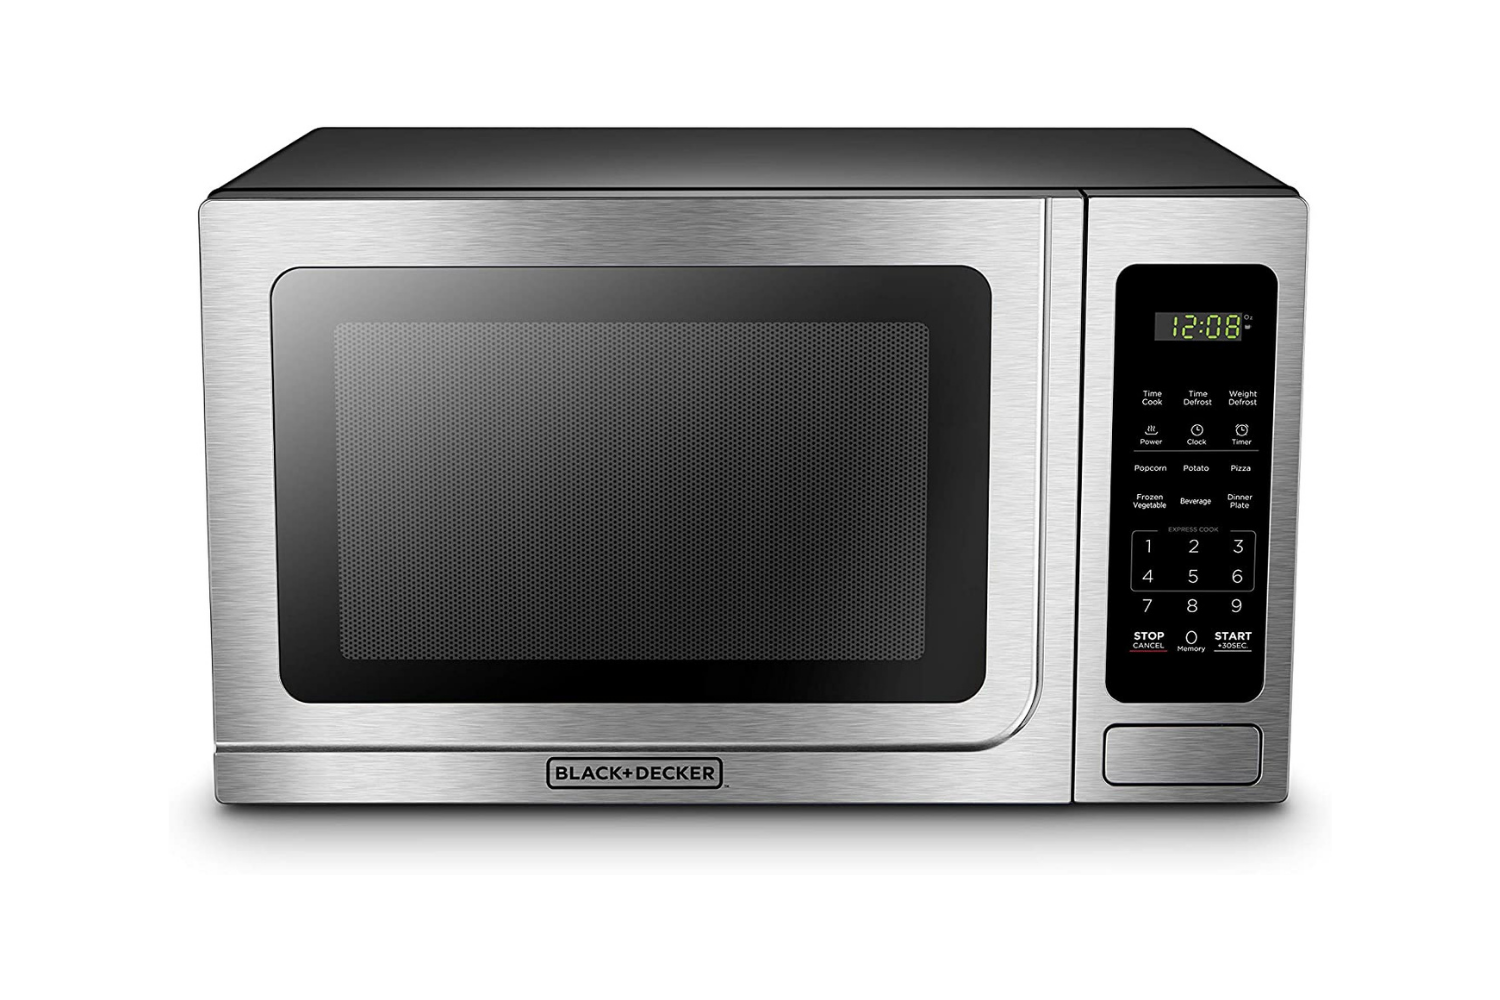 BLACK+DECKER EM036AB14 Digital Microwave Oven [Review] - YourKitchenTime